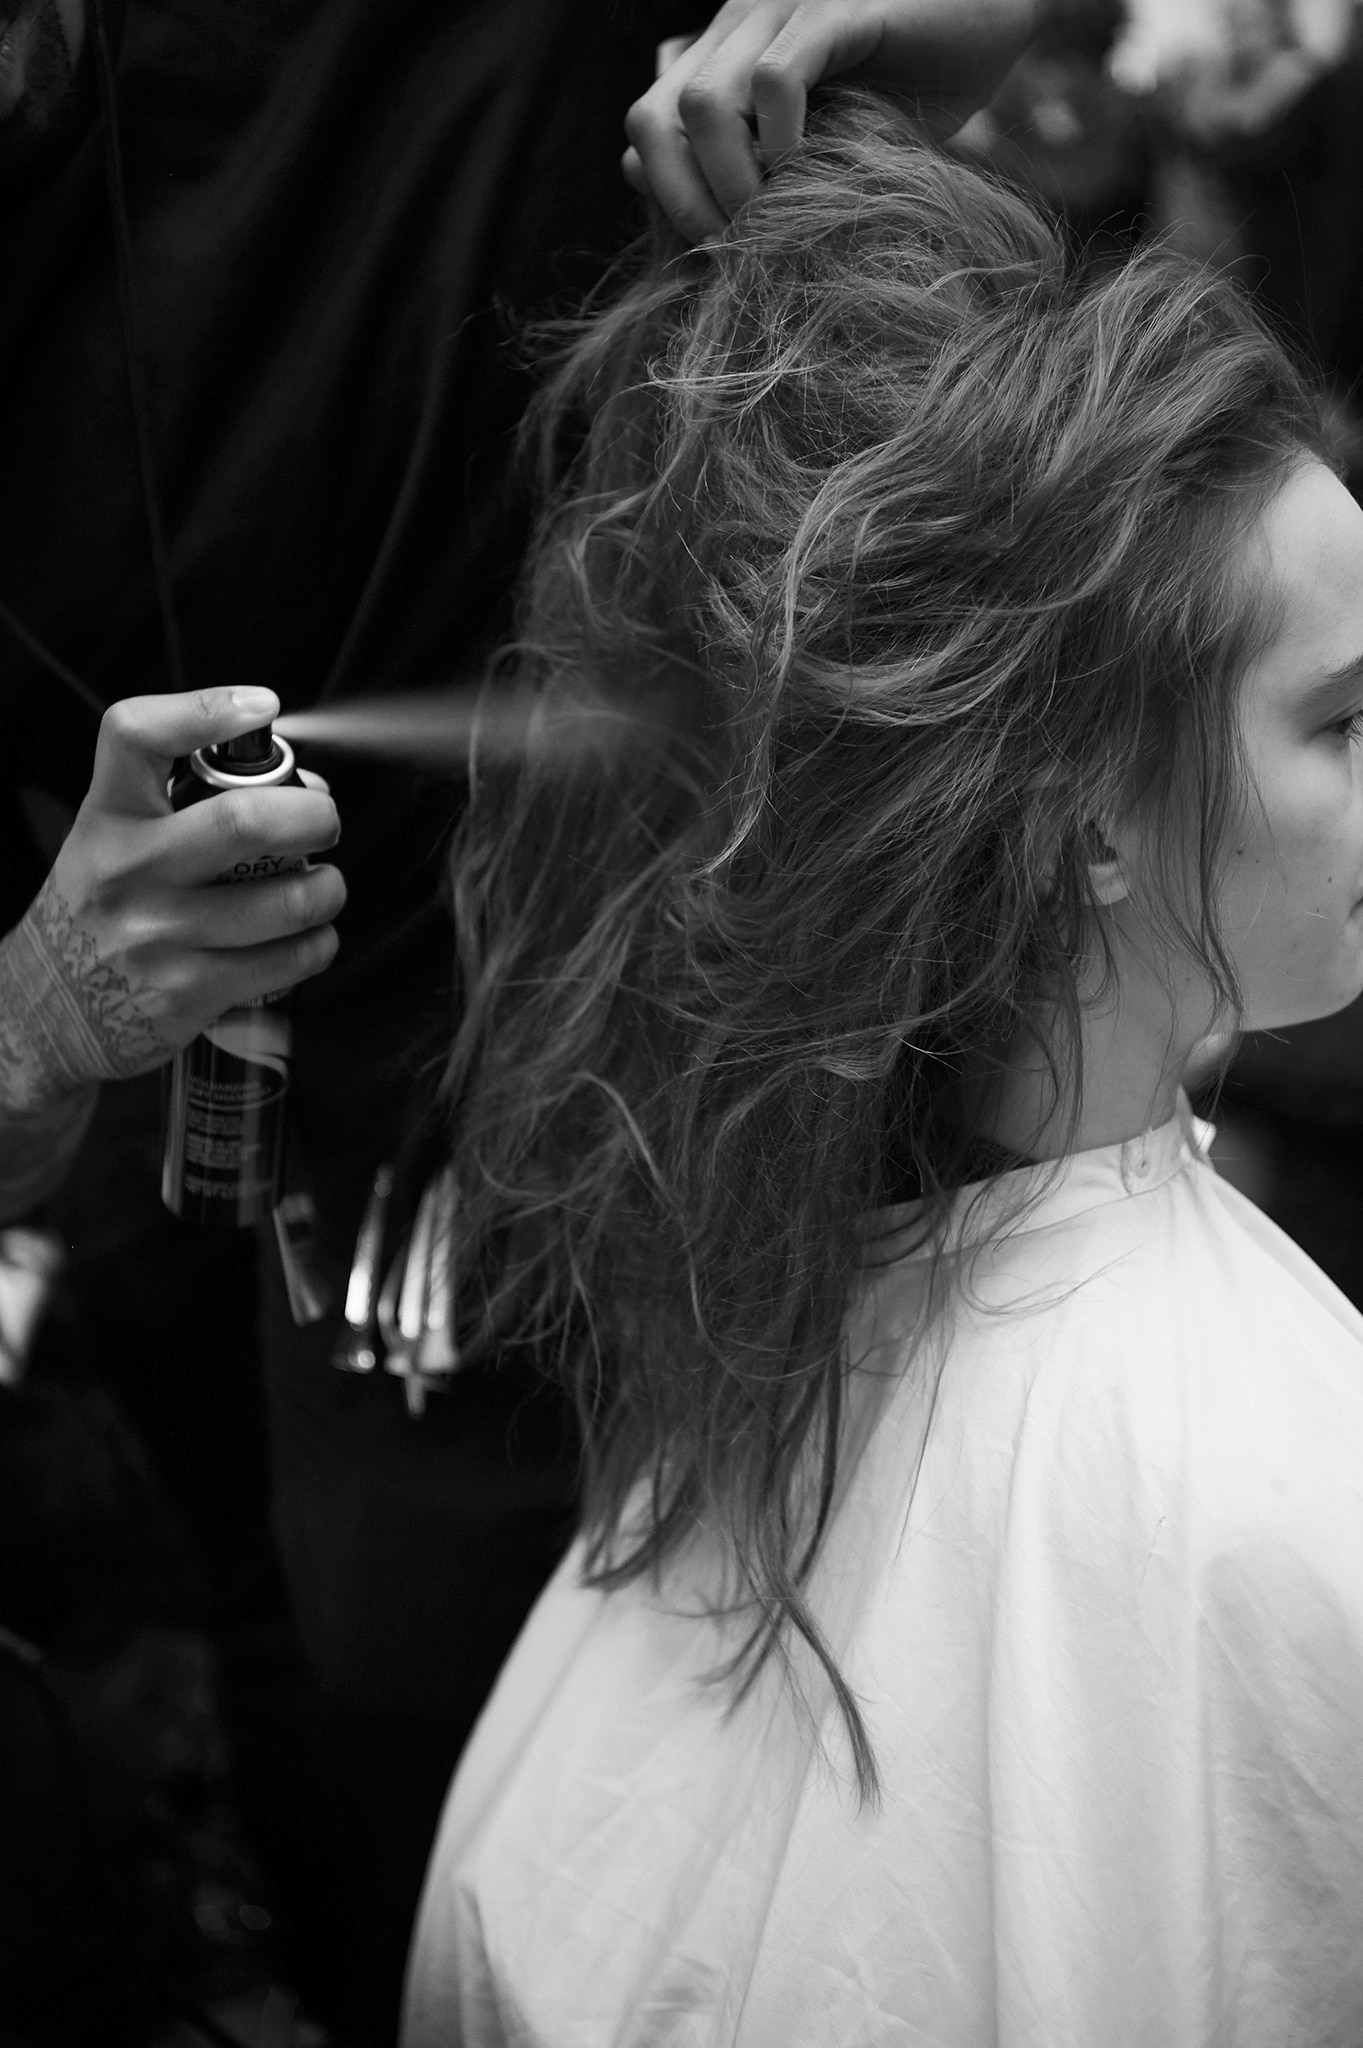 A model's head and shoulders with a stylist applying spray to her long curly hair